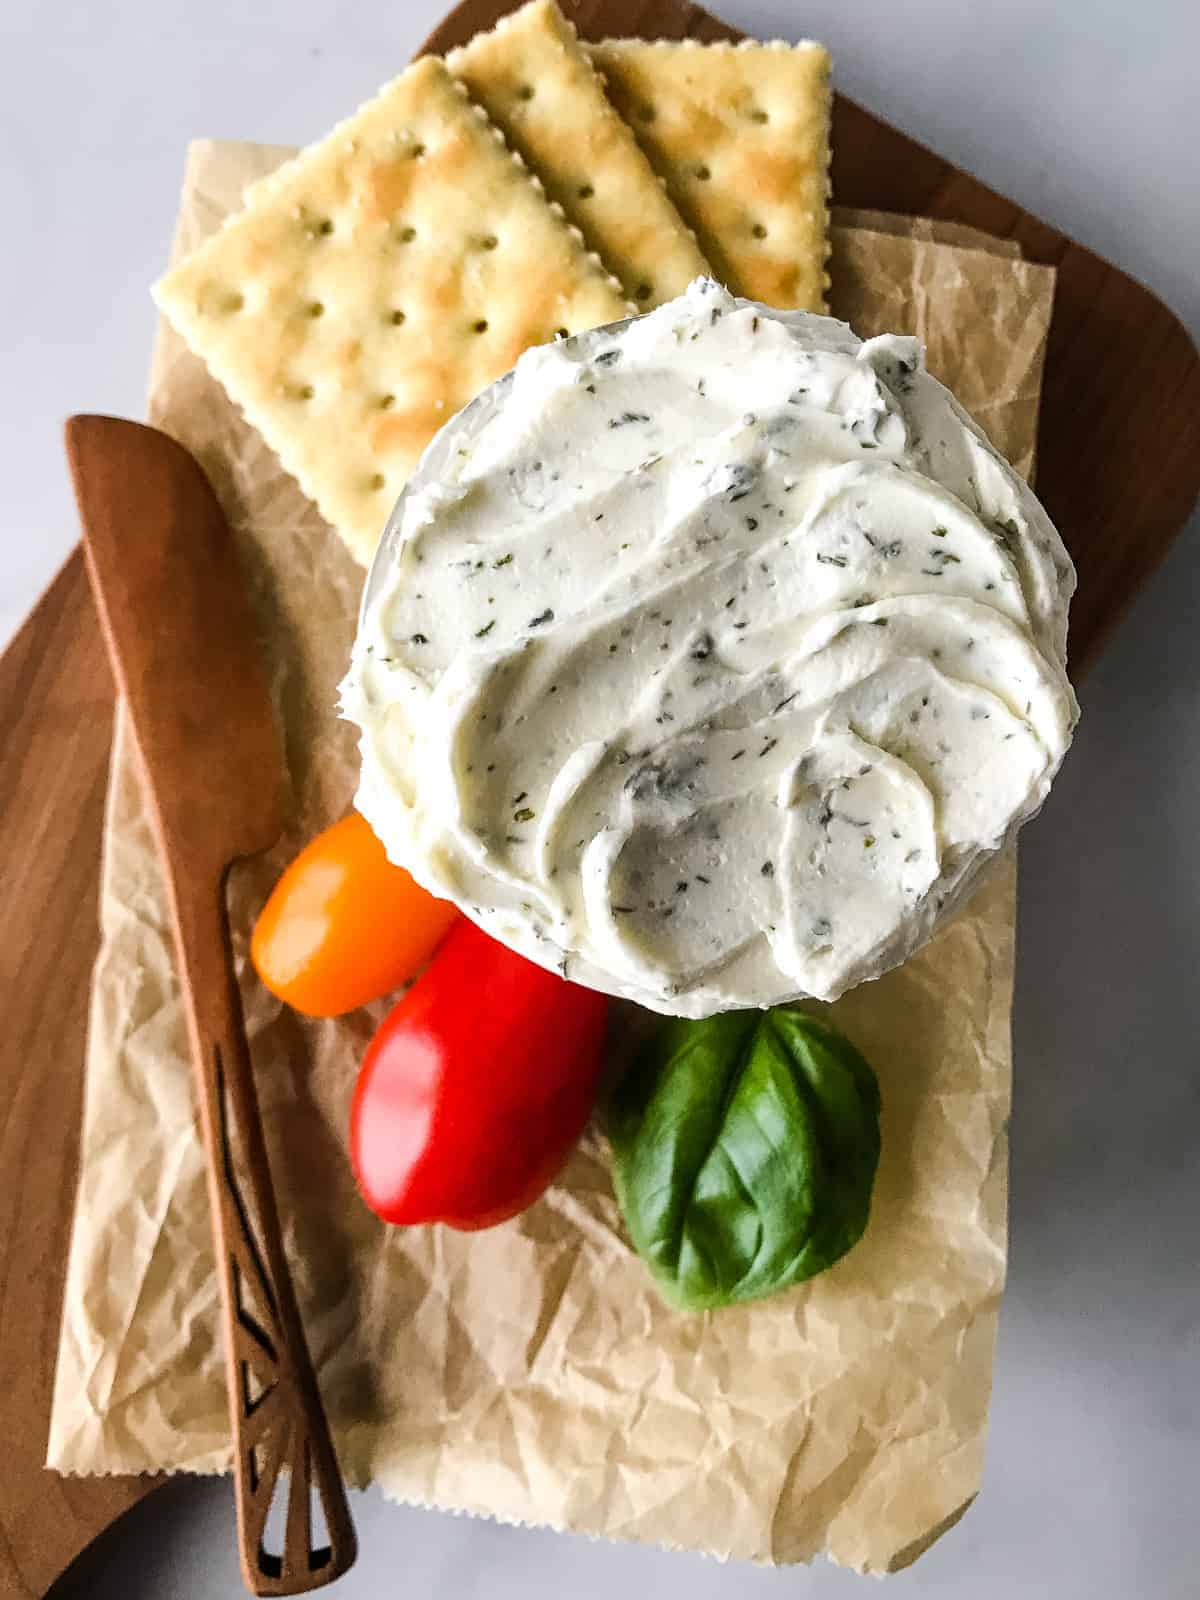 Bowl of herb and garlic cream cheese on a cutting board. Crackers and grape tomatoes are served alongside.